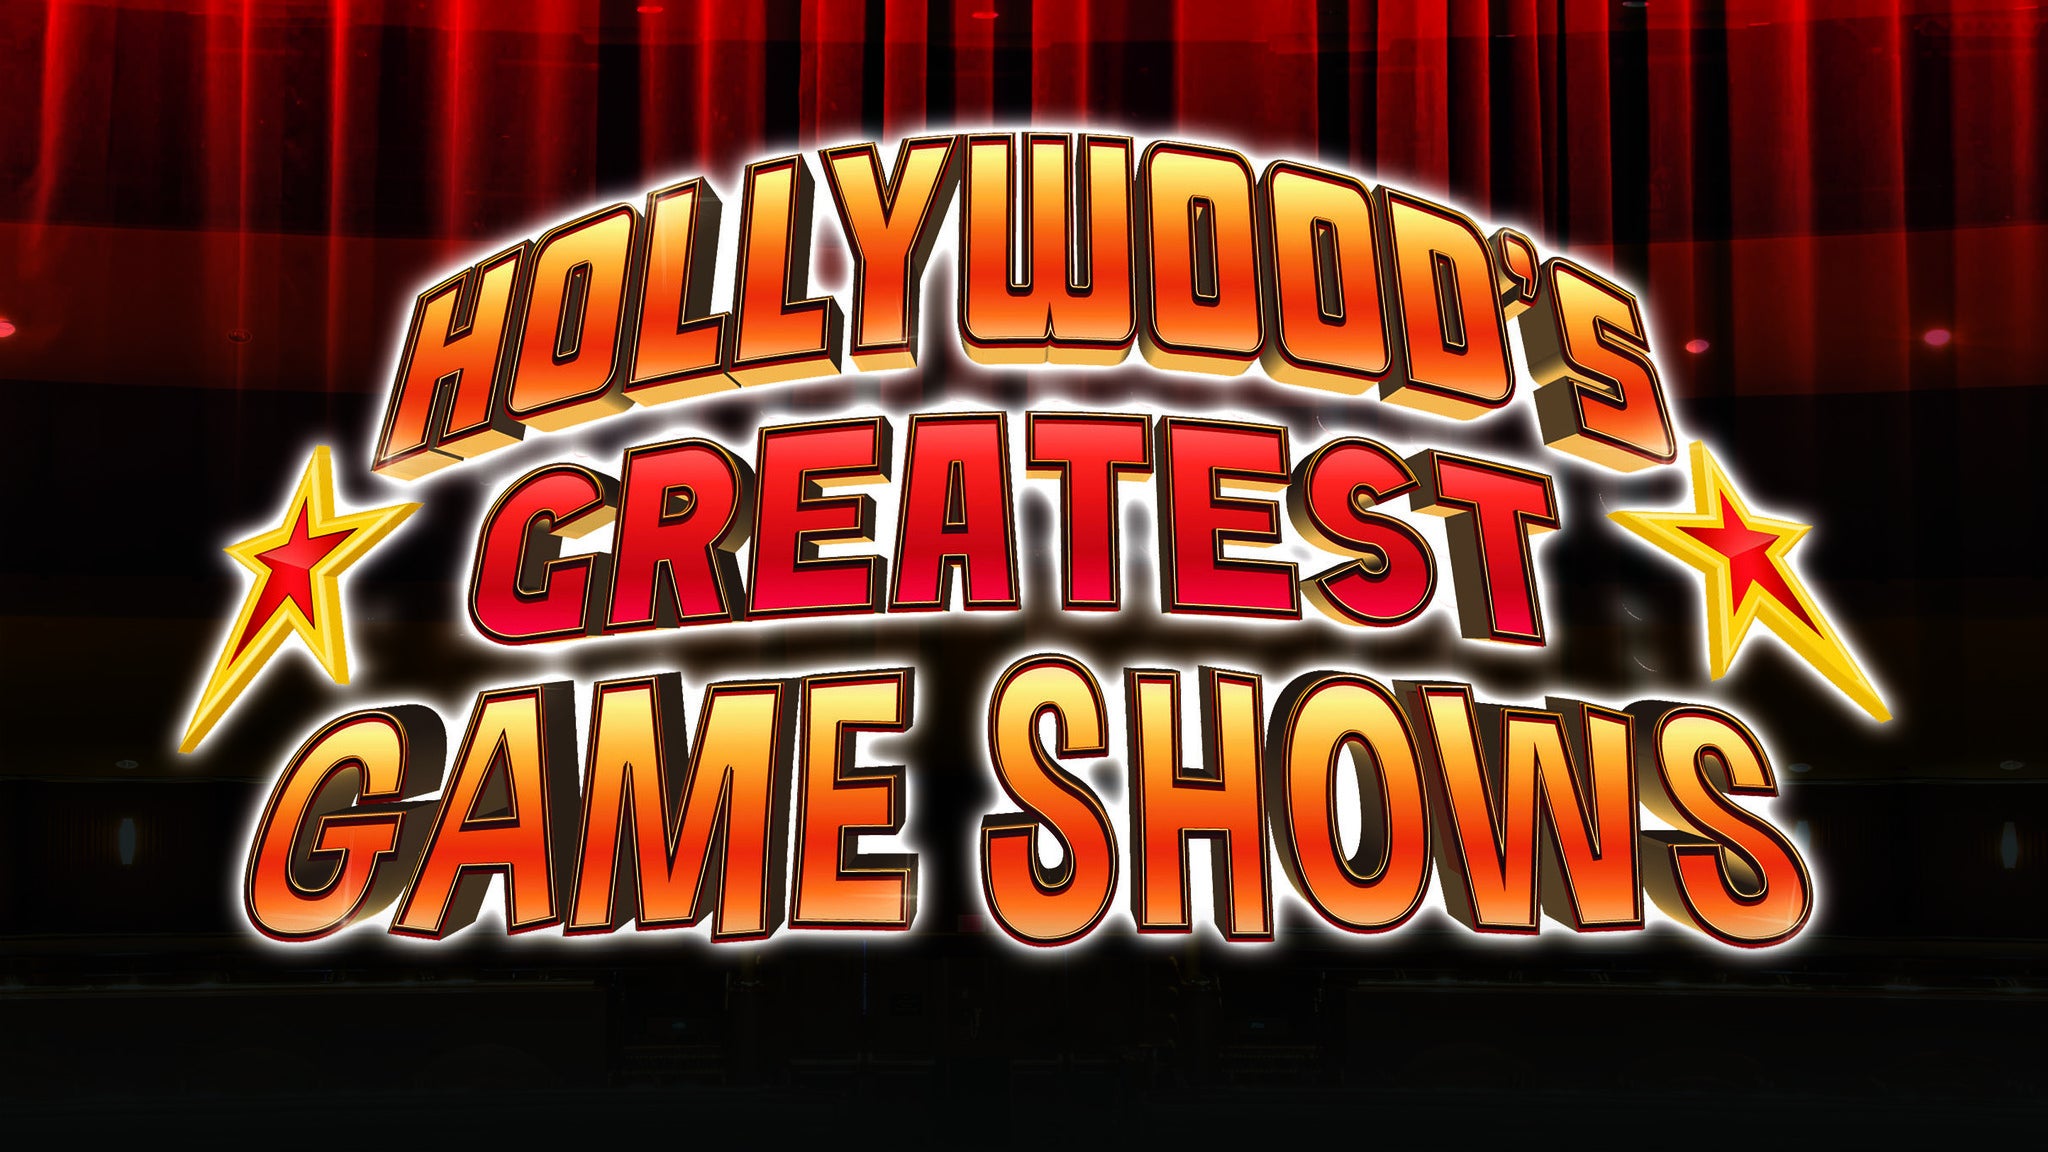 Hollywood's Greatest Game Shows in St Louis promo photo for Mychoice presale offer code